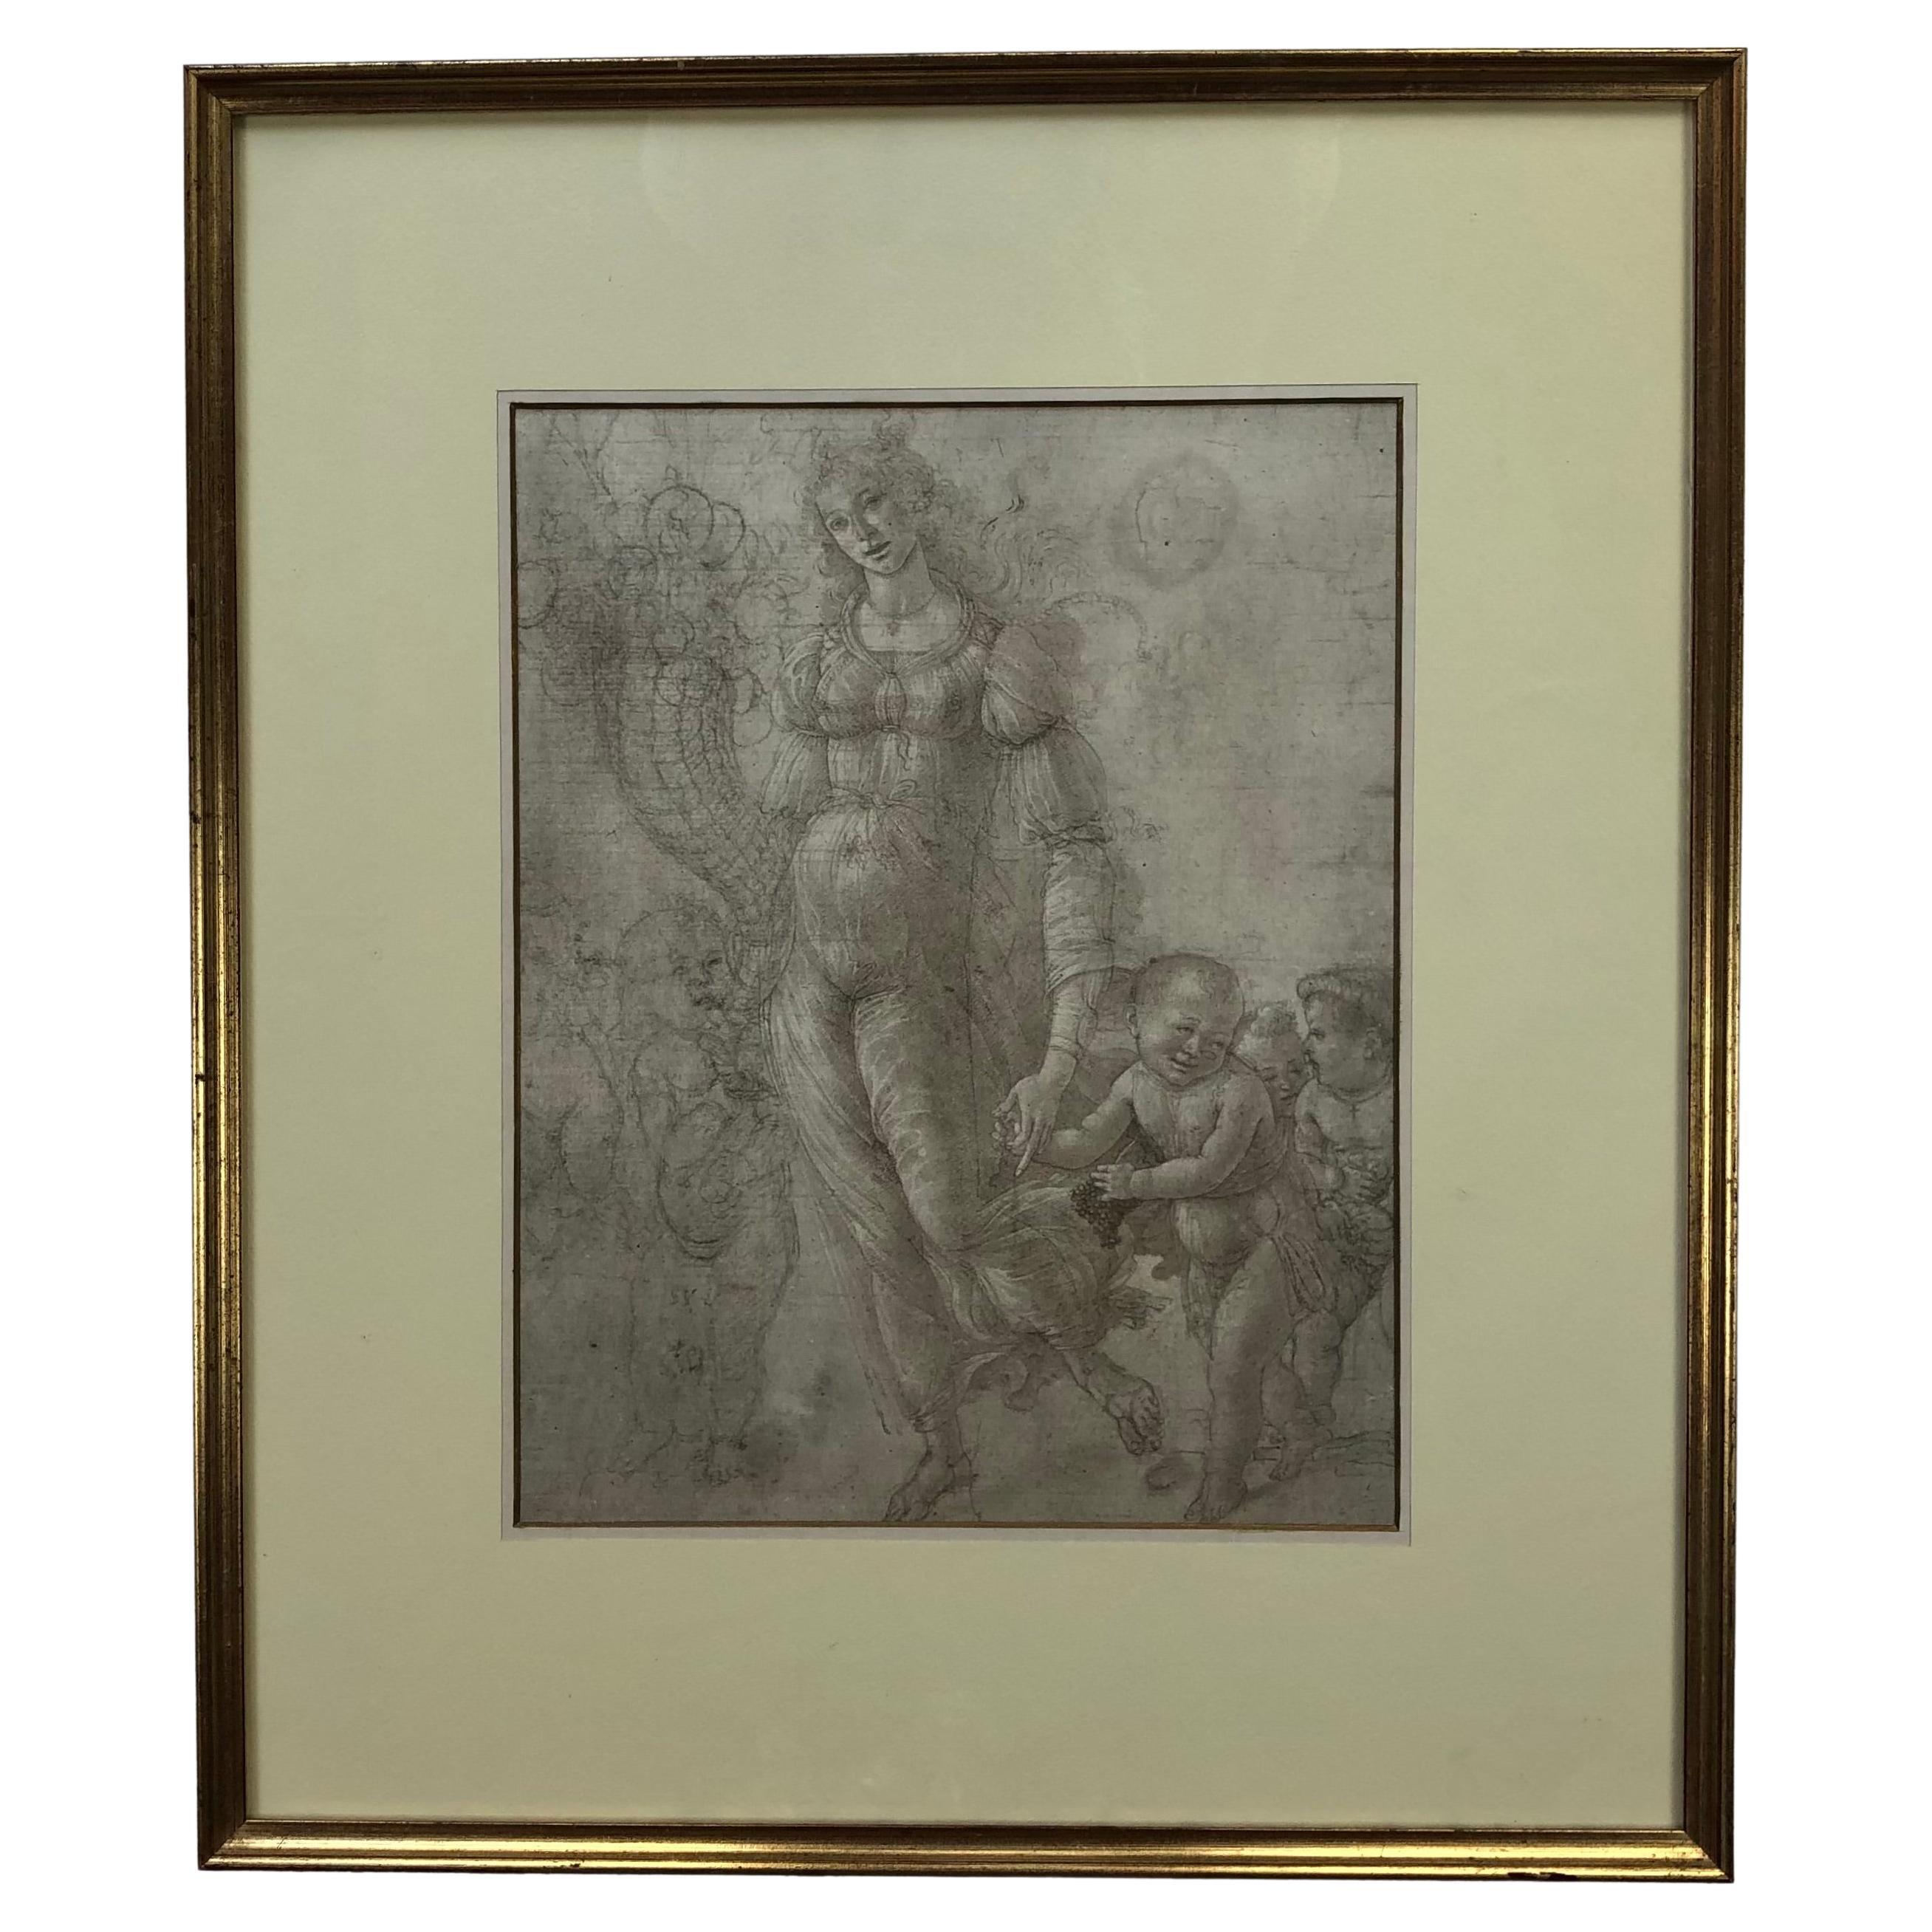 French Neoclassical Drawing Woman with Children Framed by the Medici Society